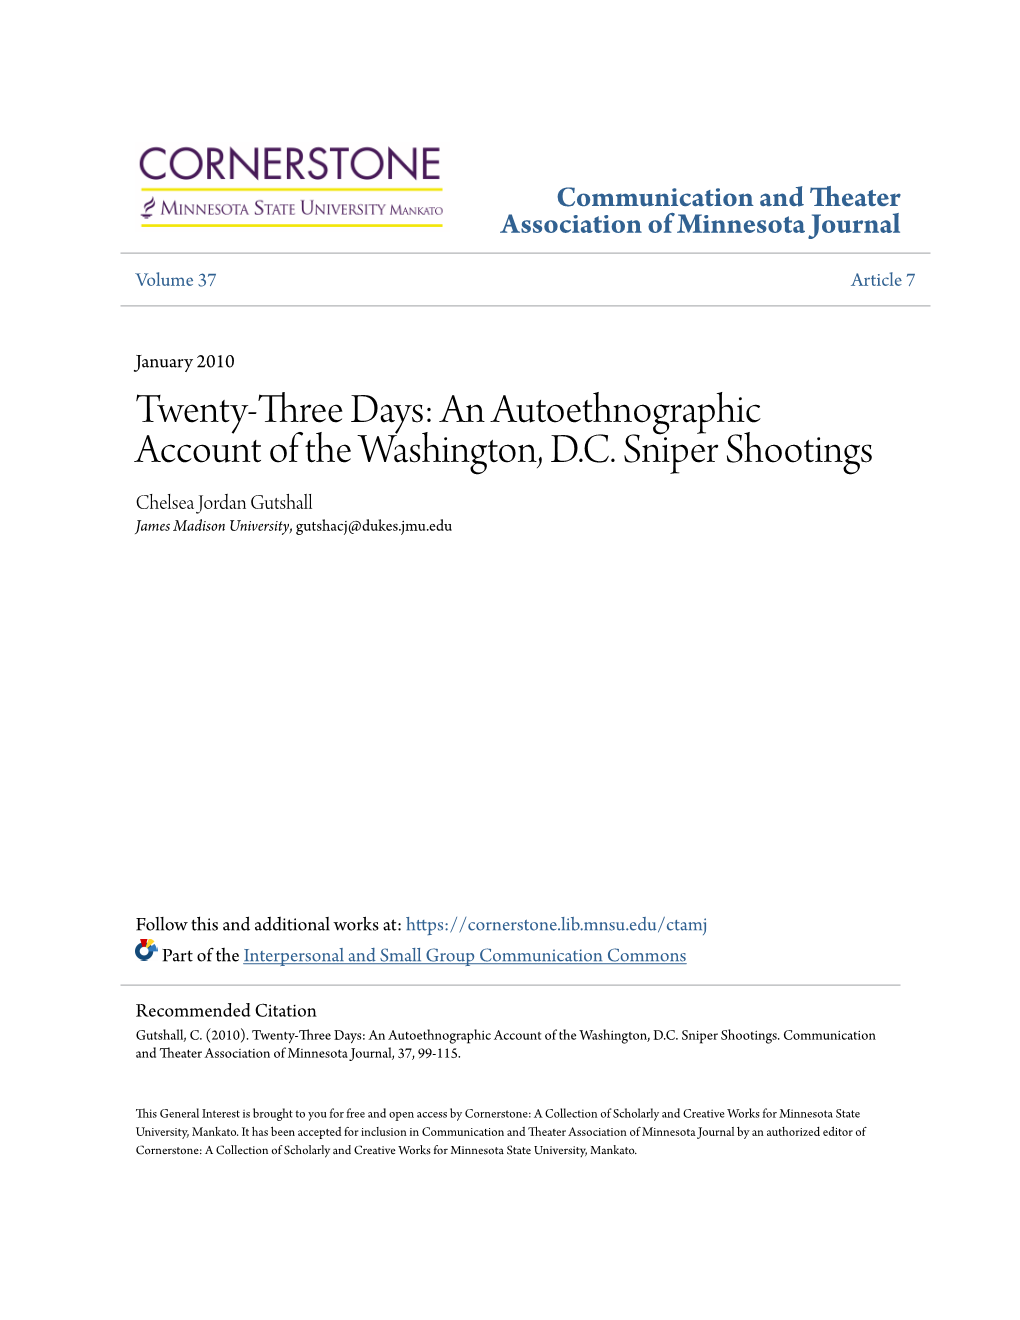 An Autoethnographic Account of the Washington, DC Sniper Shootings